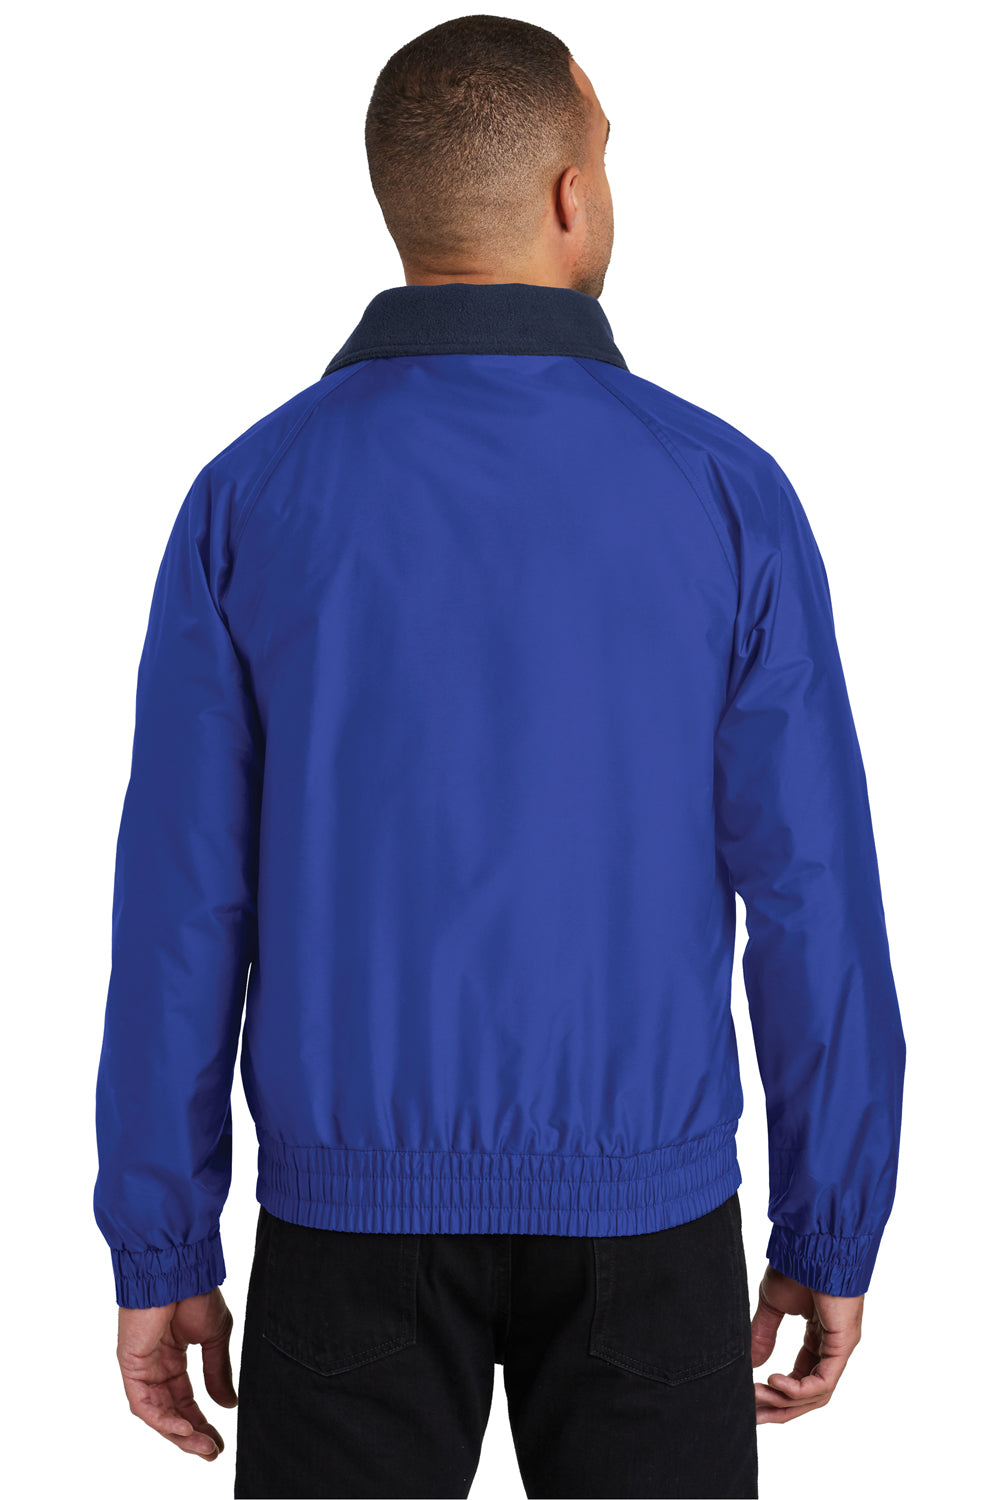 Port Authority JP54 Mens Competitor Wind & Water Resistant Full Zip Jacket Royal Blue Back